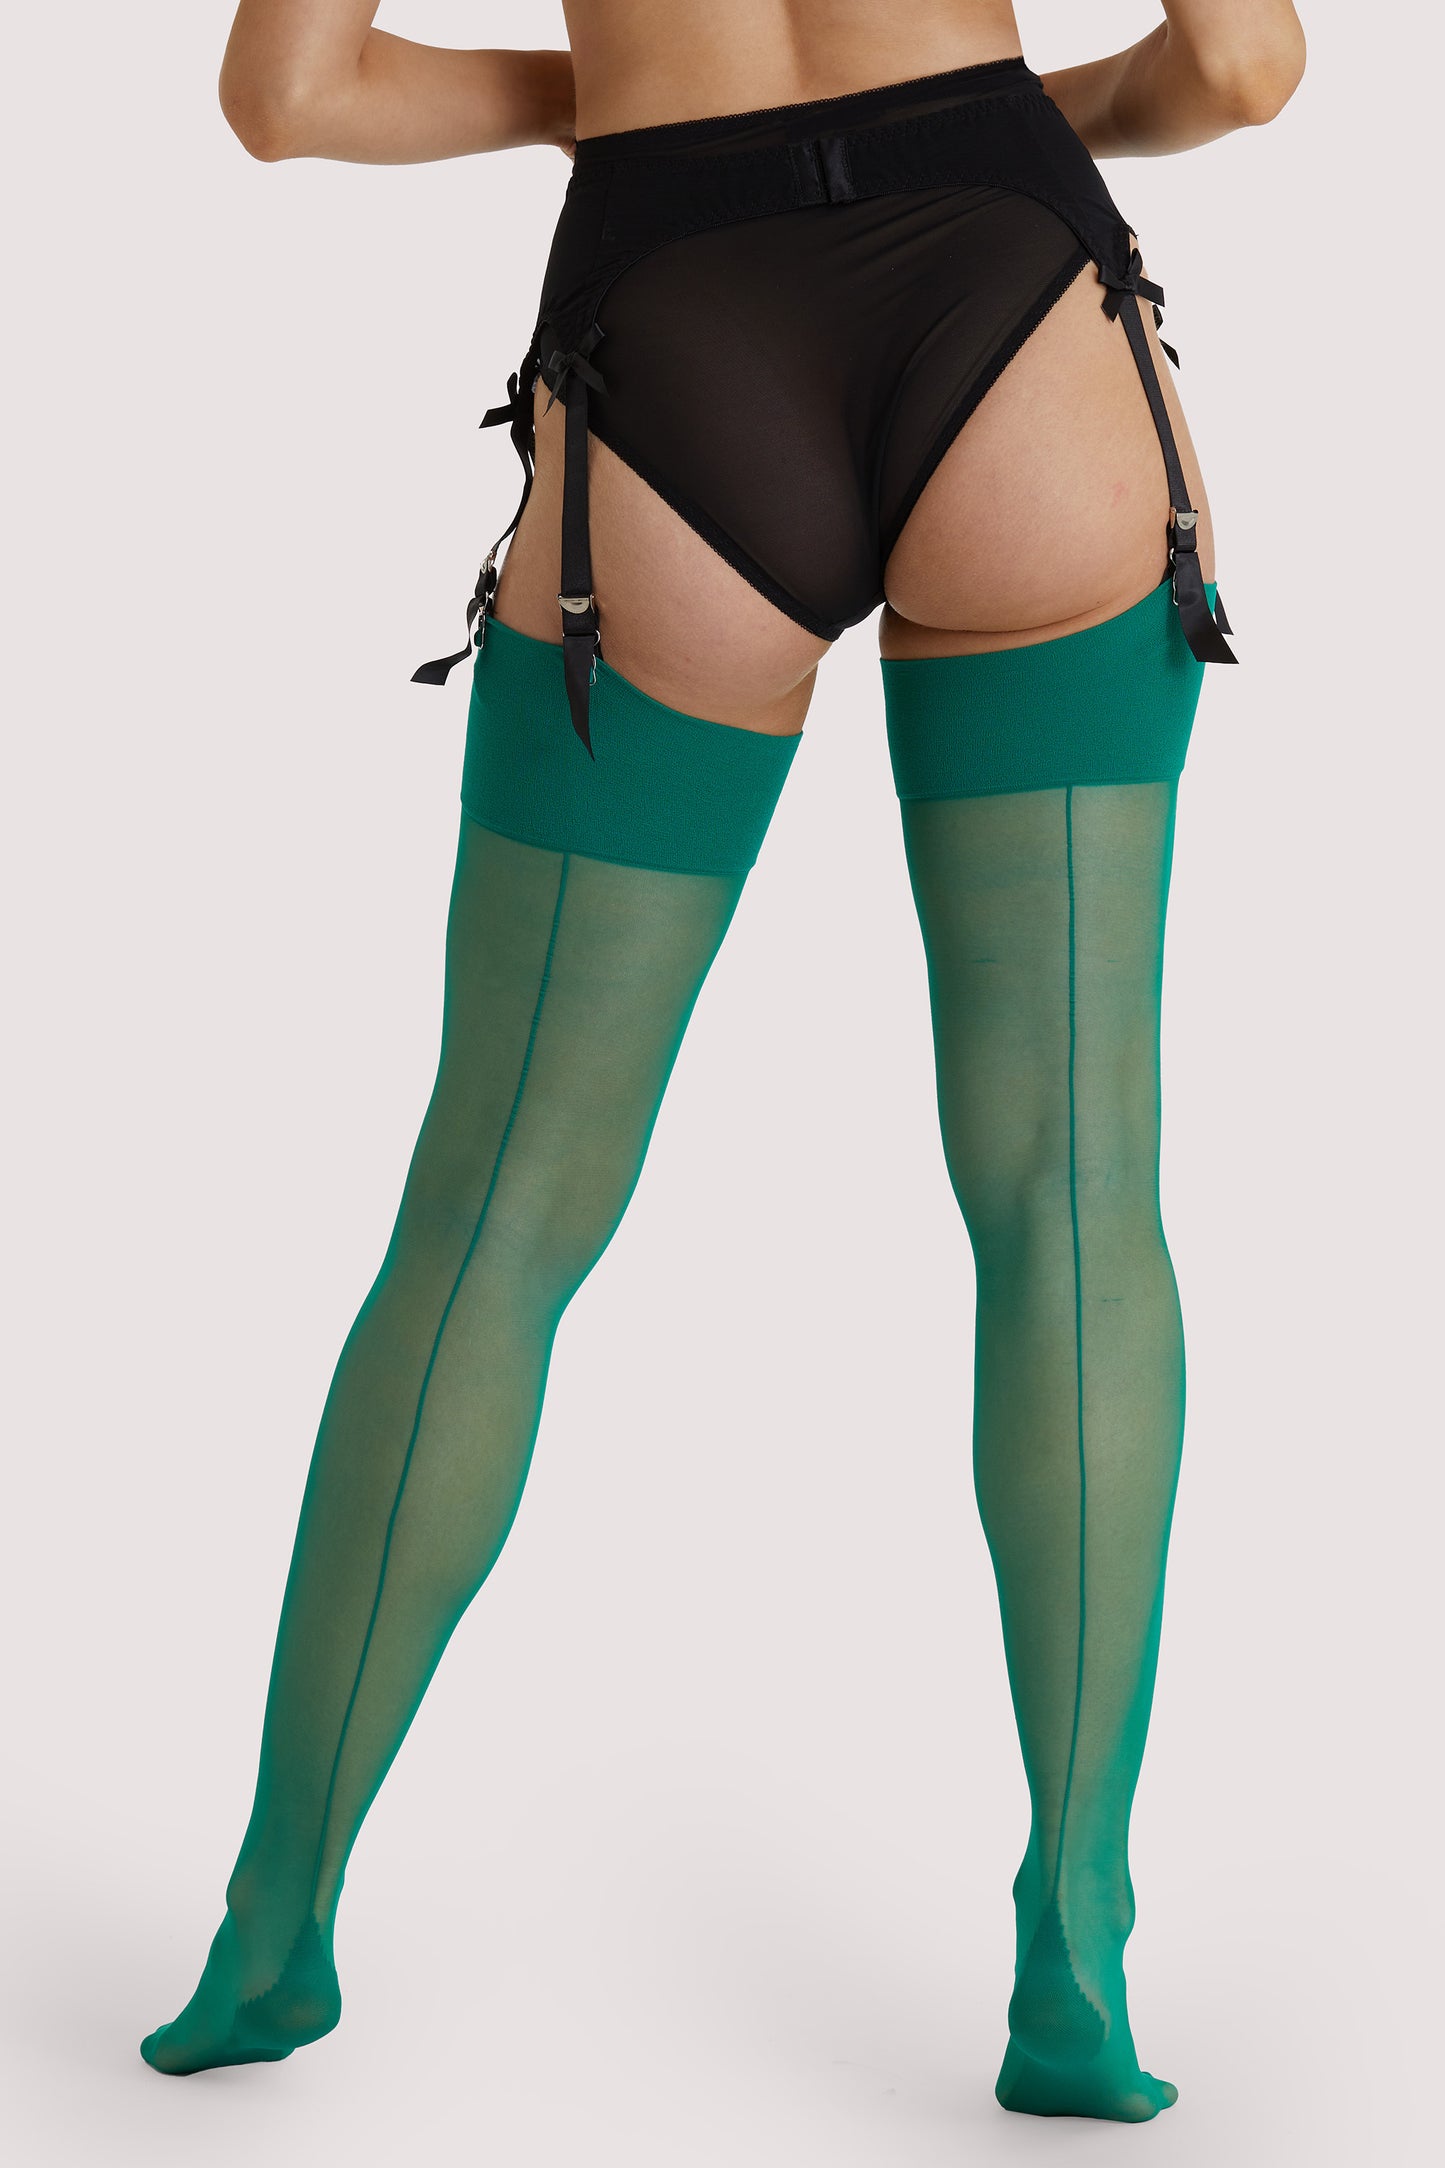 Emerald Green Seamed Stockings - Sizes 4-18